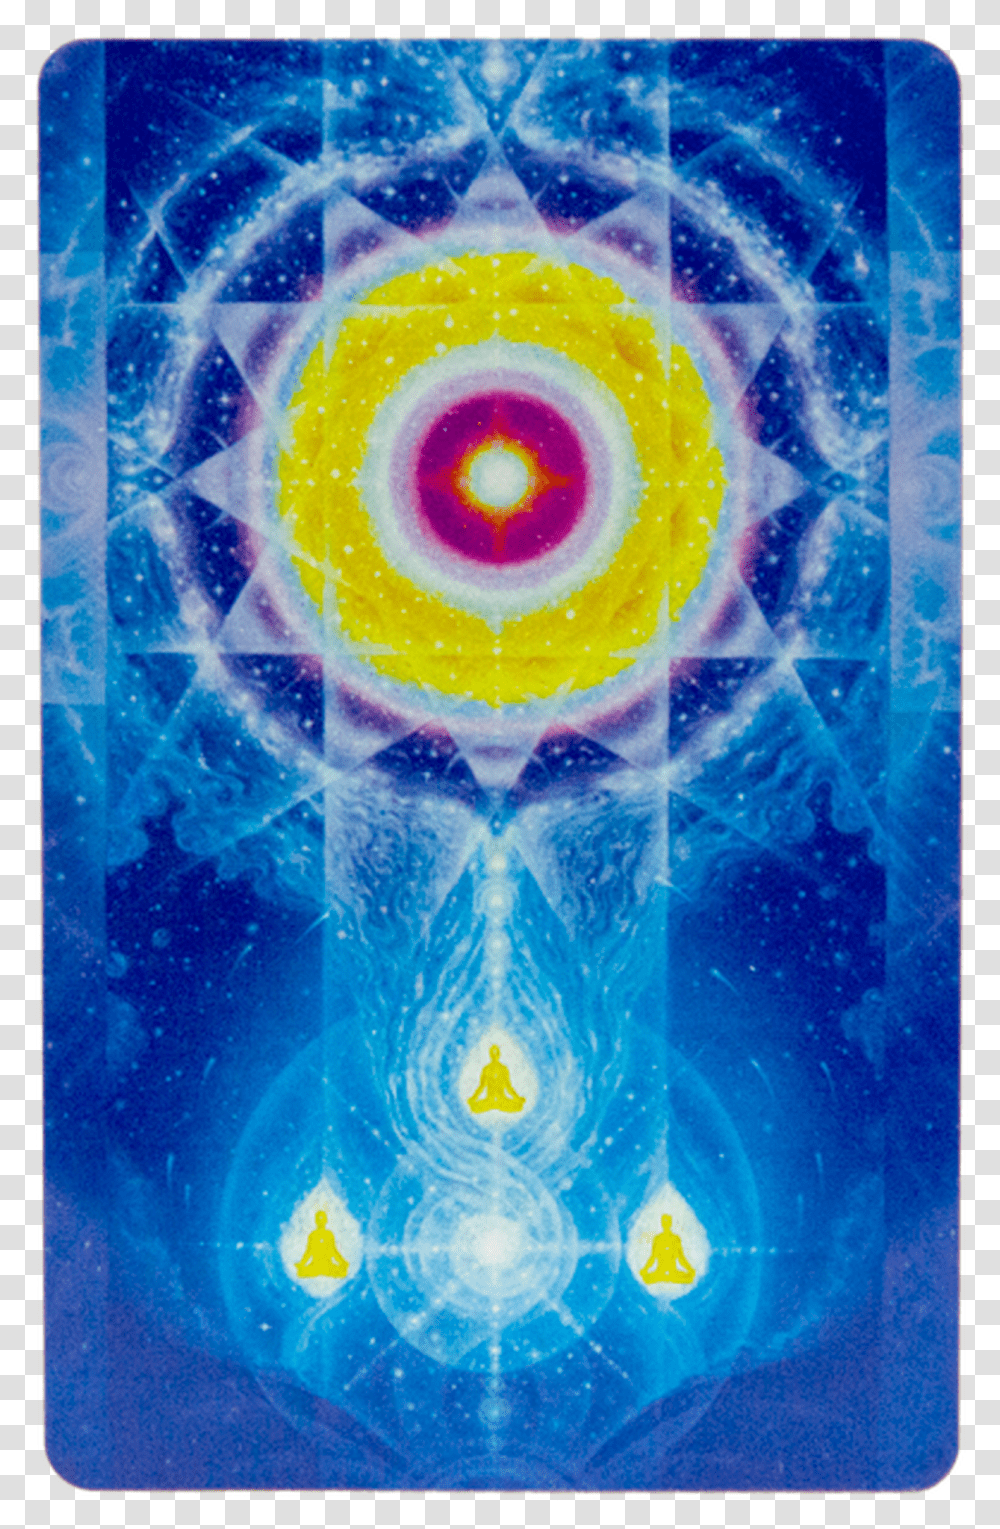 Lifeparticle Energy Meditation Card Transparent Png